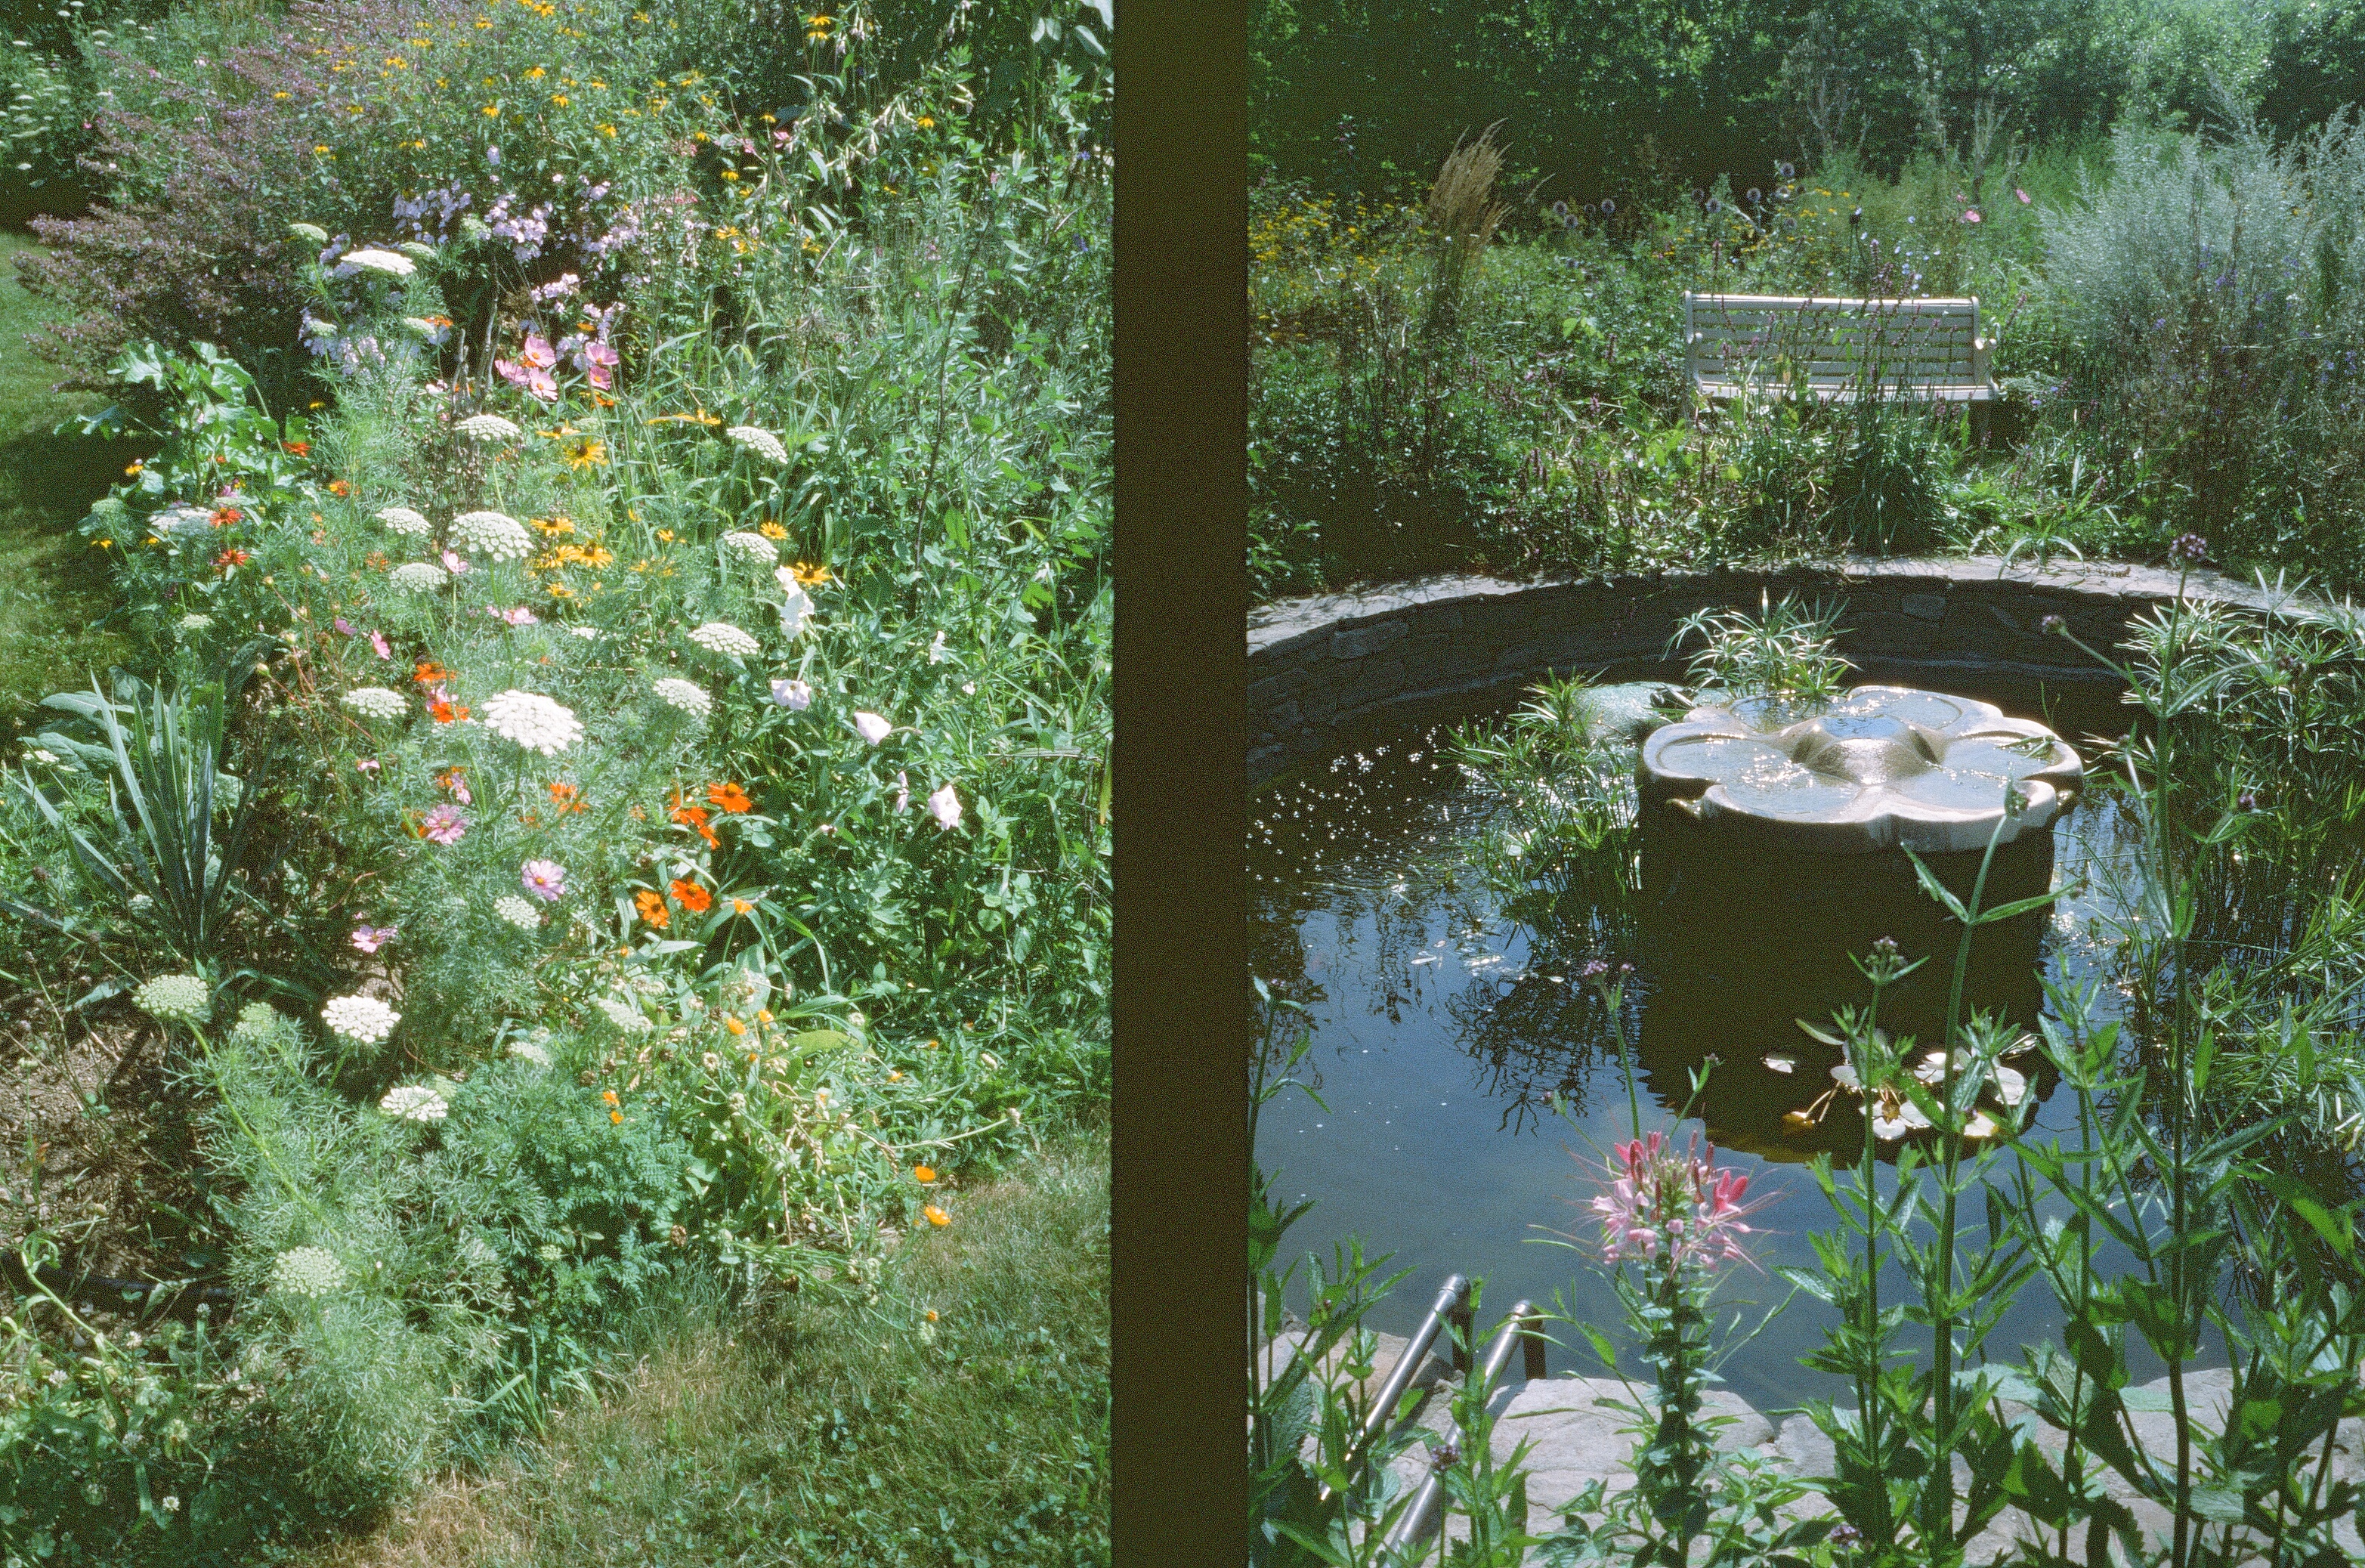 wildflowers grow next to a fountain with a flower shaped sculpture